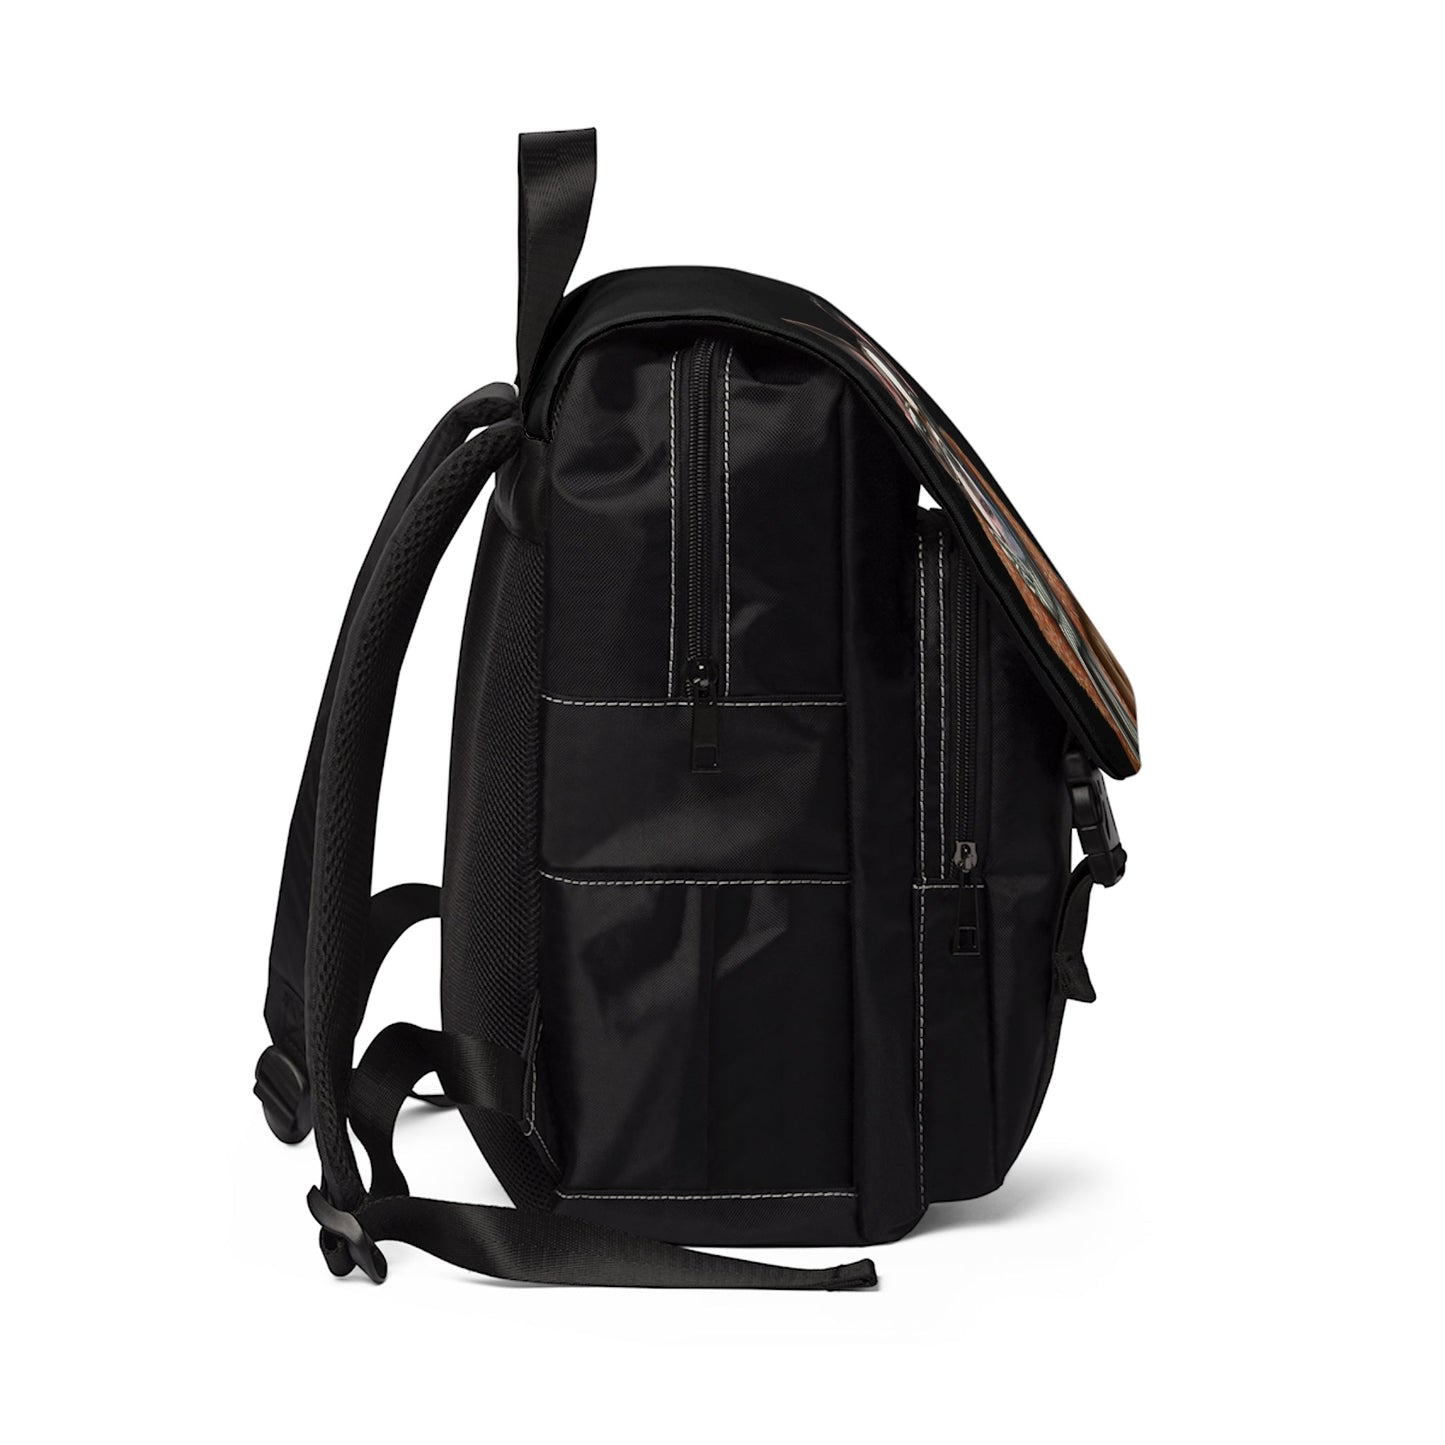 BENNY : Unisex Casual Shoulder Backpack - Shaggy Chic